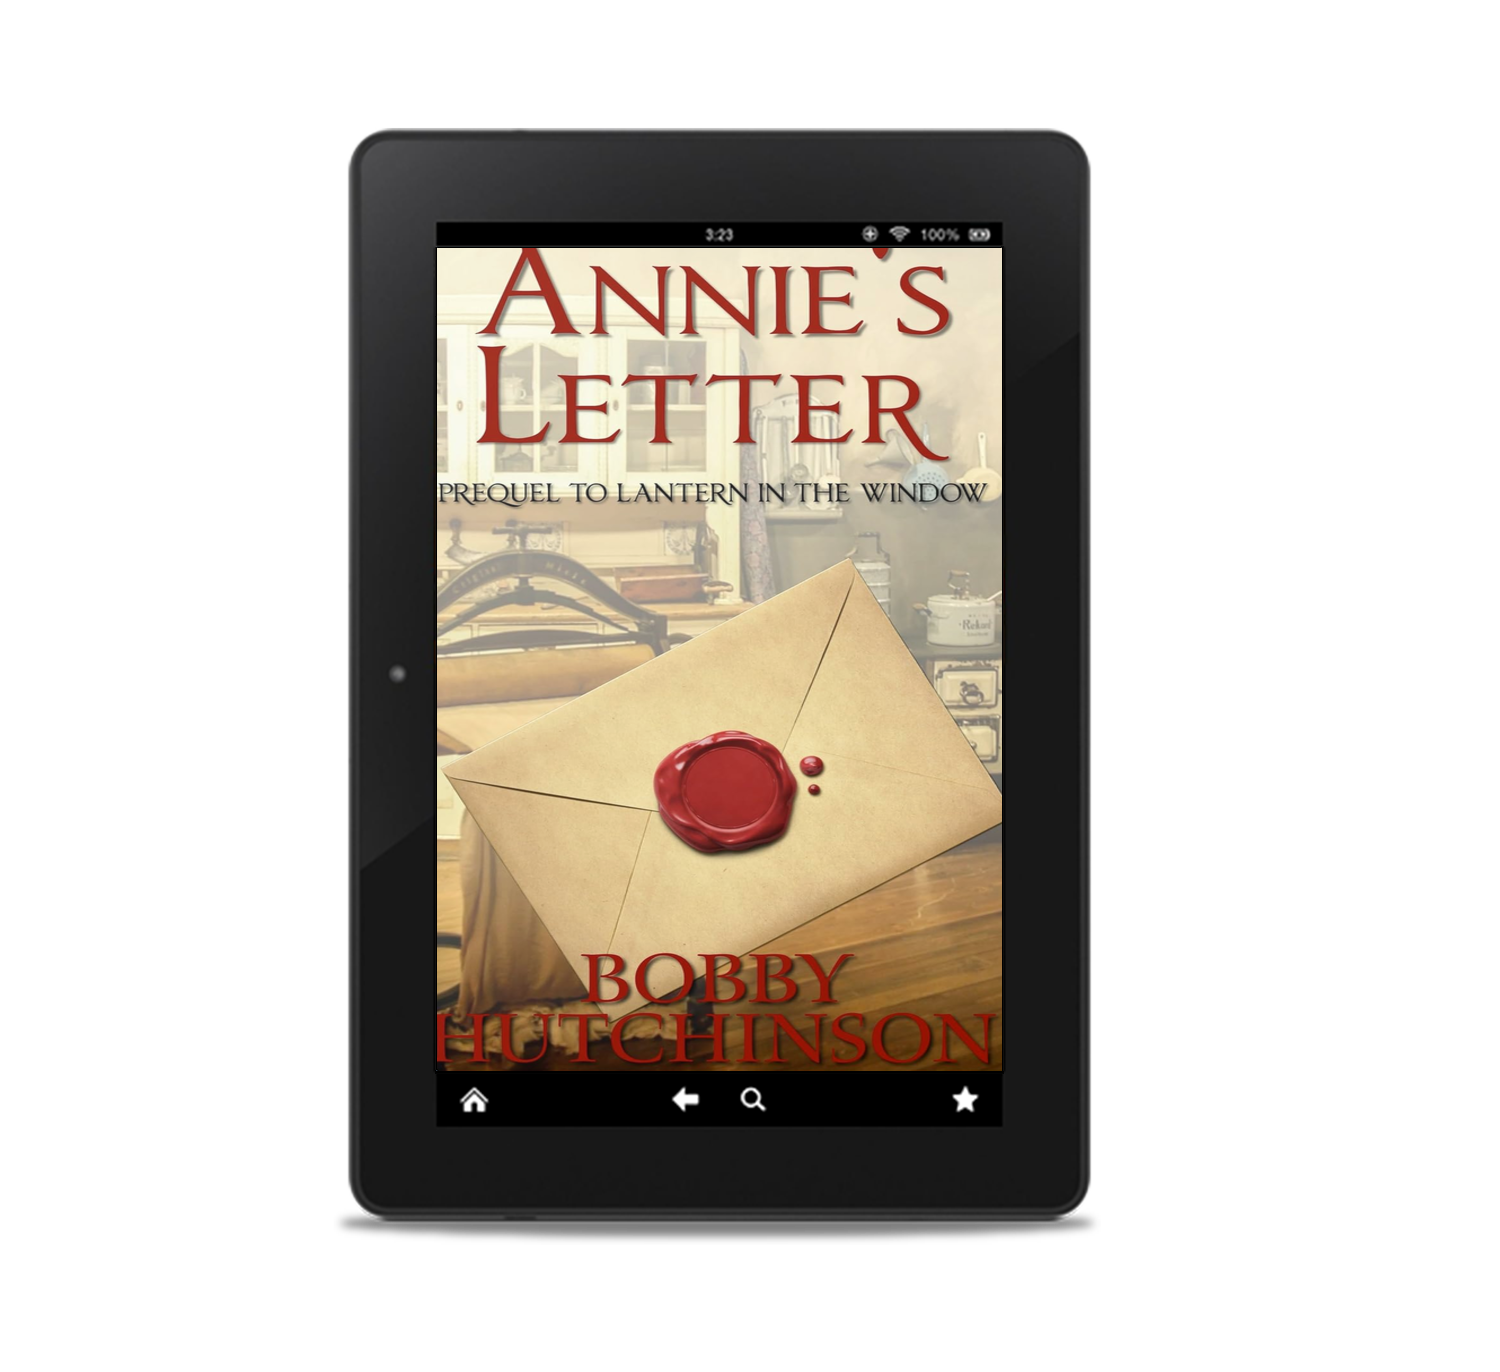 Annie's Letter by Bobby Hutchinson